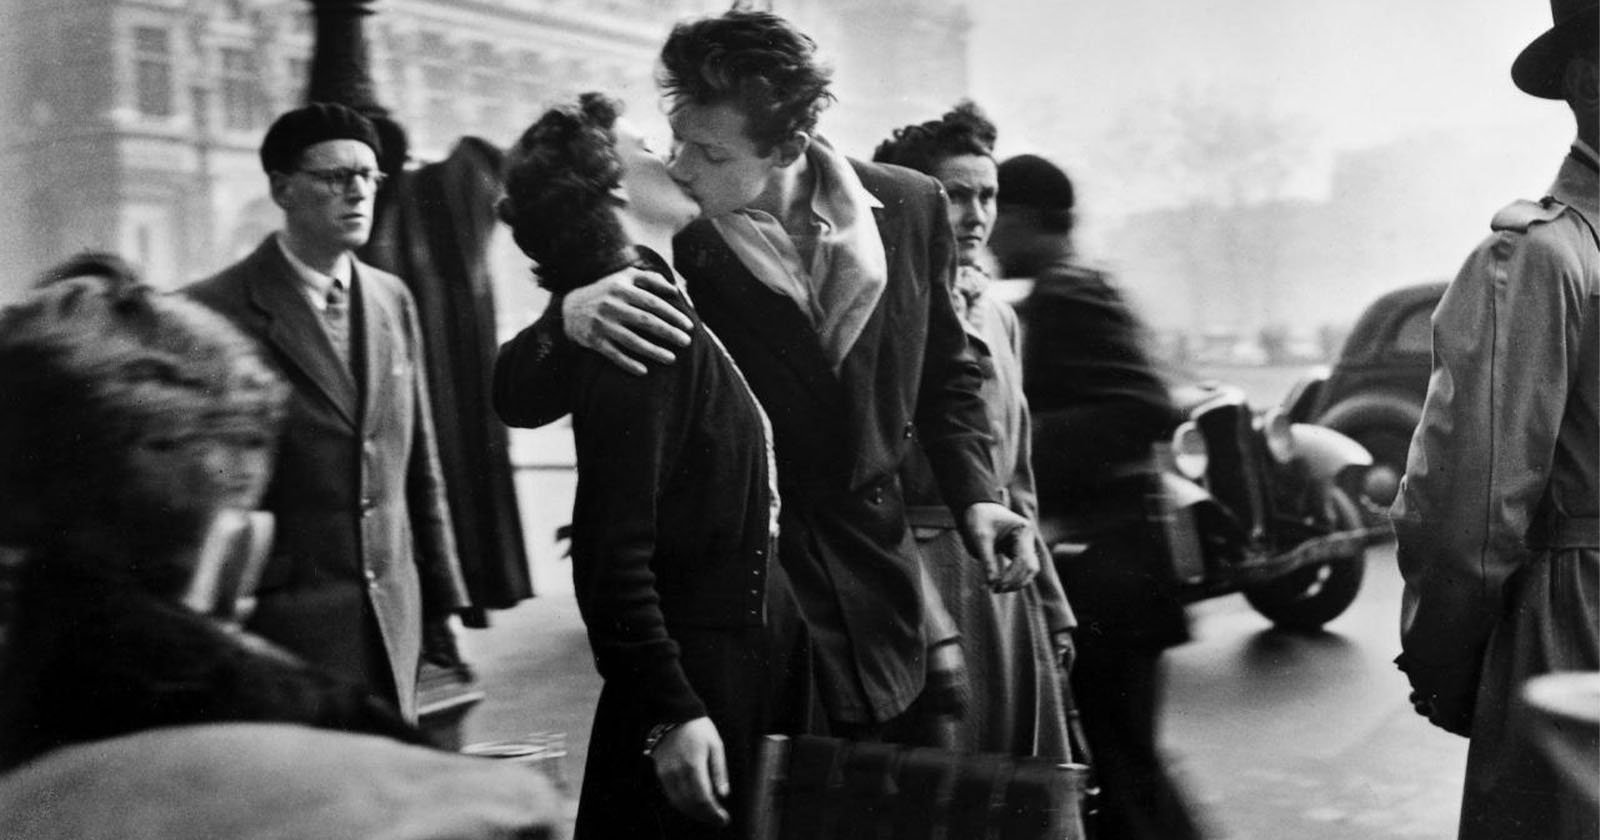 Woman in Iconic Kissing Photo Taken in Paris Dies Aged 93